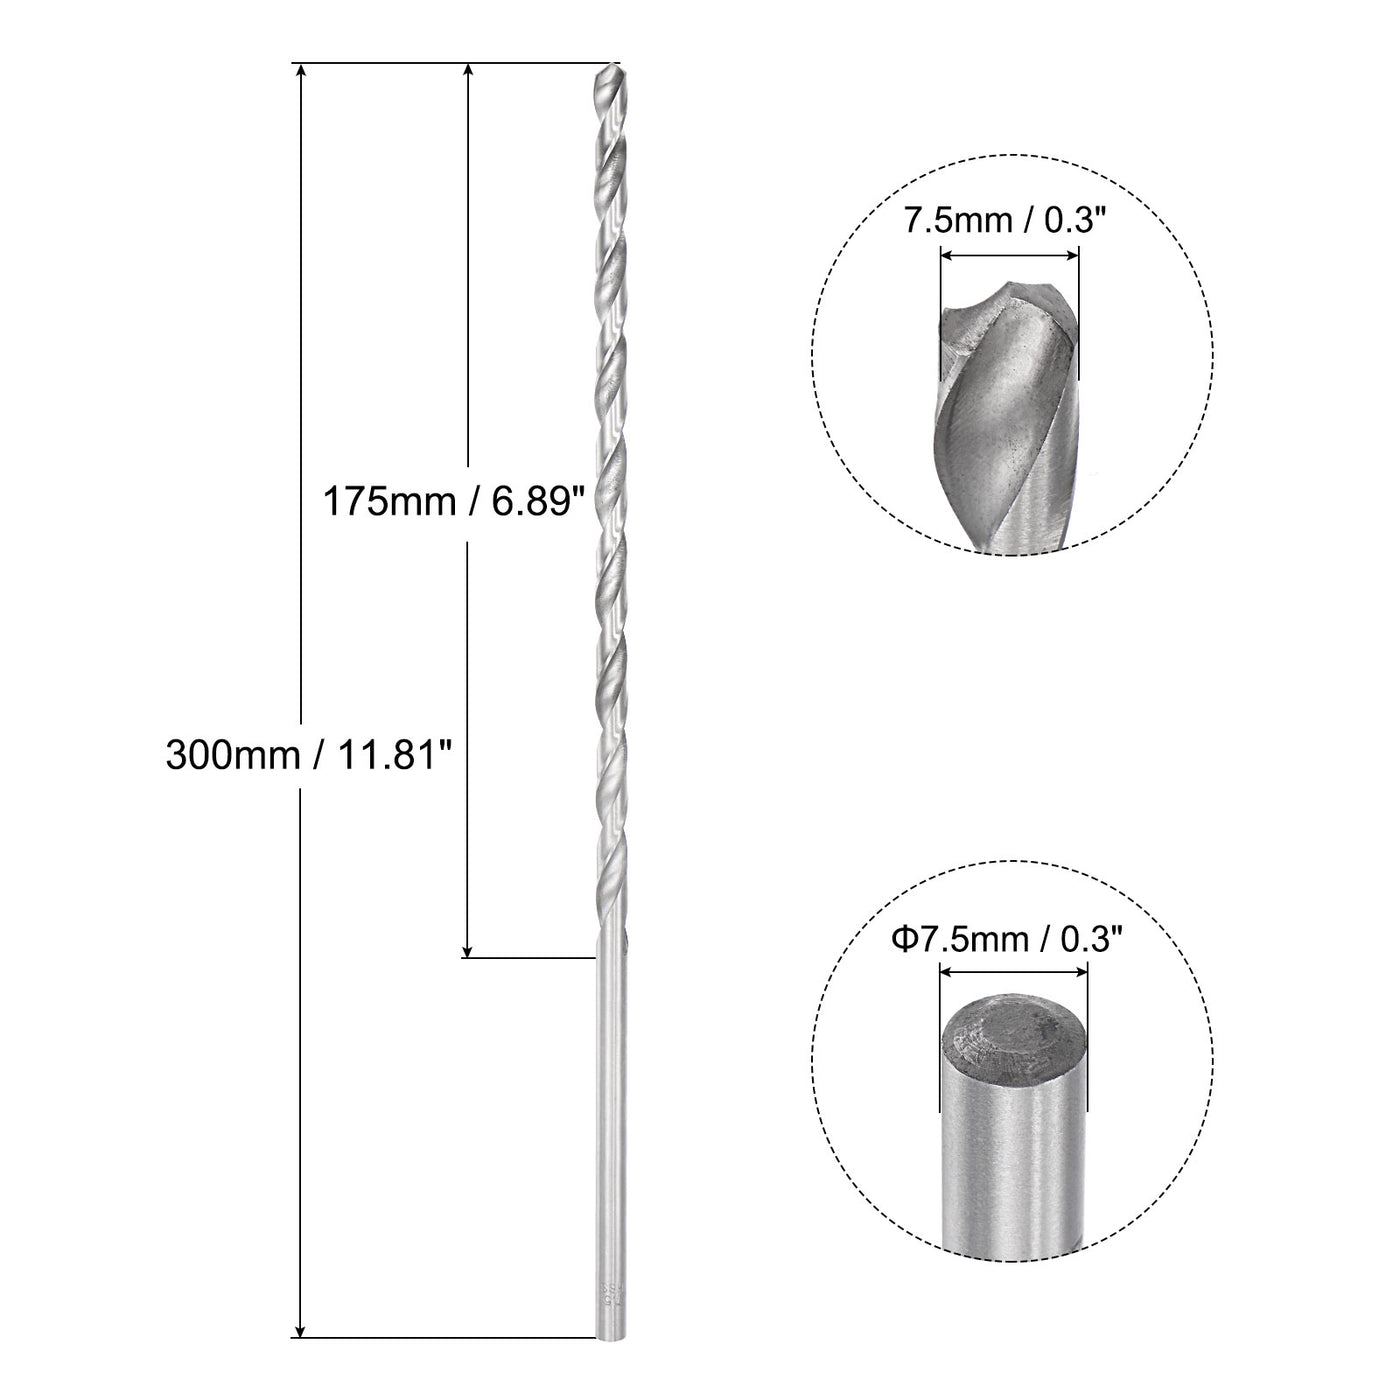 uxcell Uxcell 7.5mm Twist Drill Bits, High-Speed Steel Extra Long Drill Bit 300mm Length